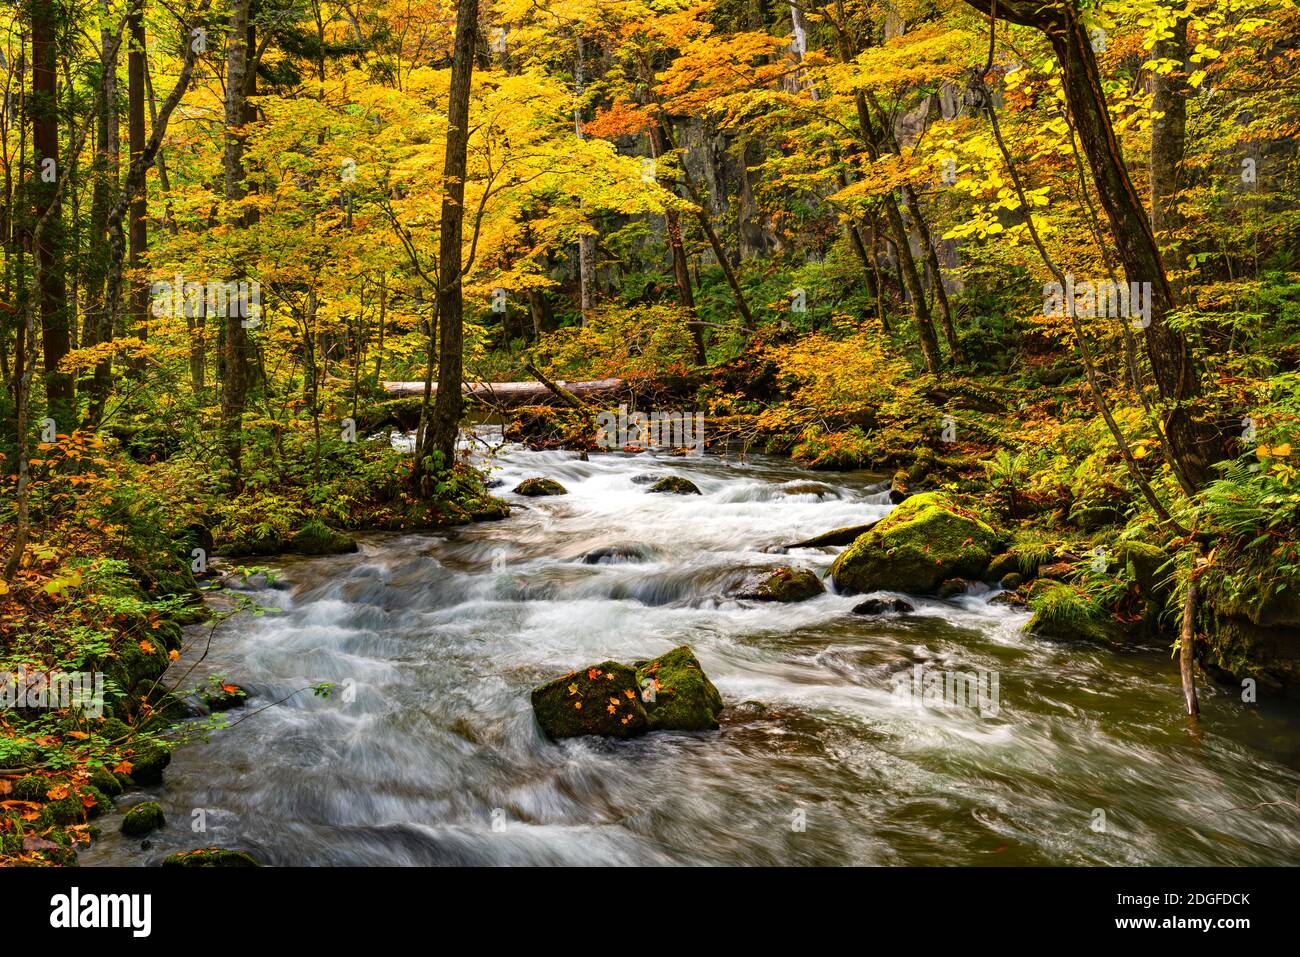 Beautiful Oirase Mountain Stream flow over rocks in the colorful foliage of autumn forest Stock Photo